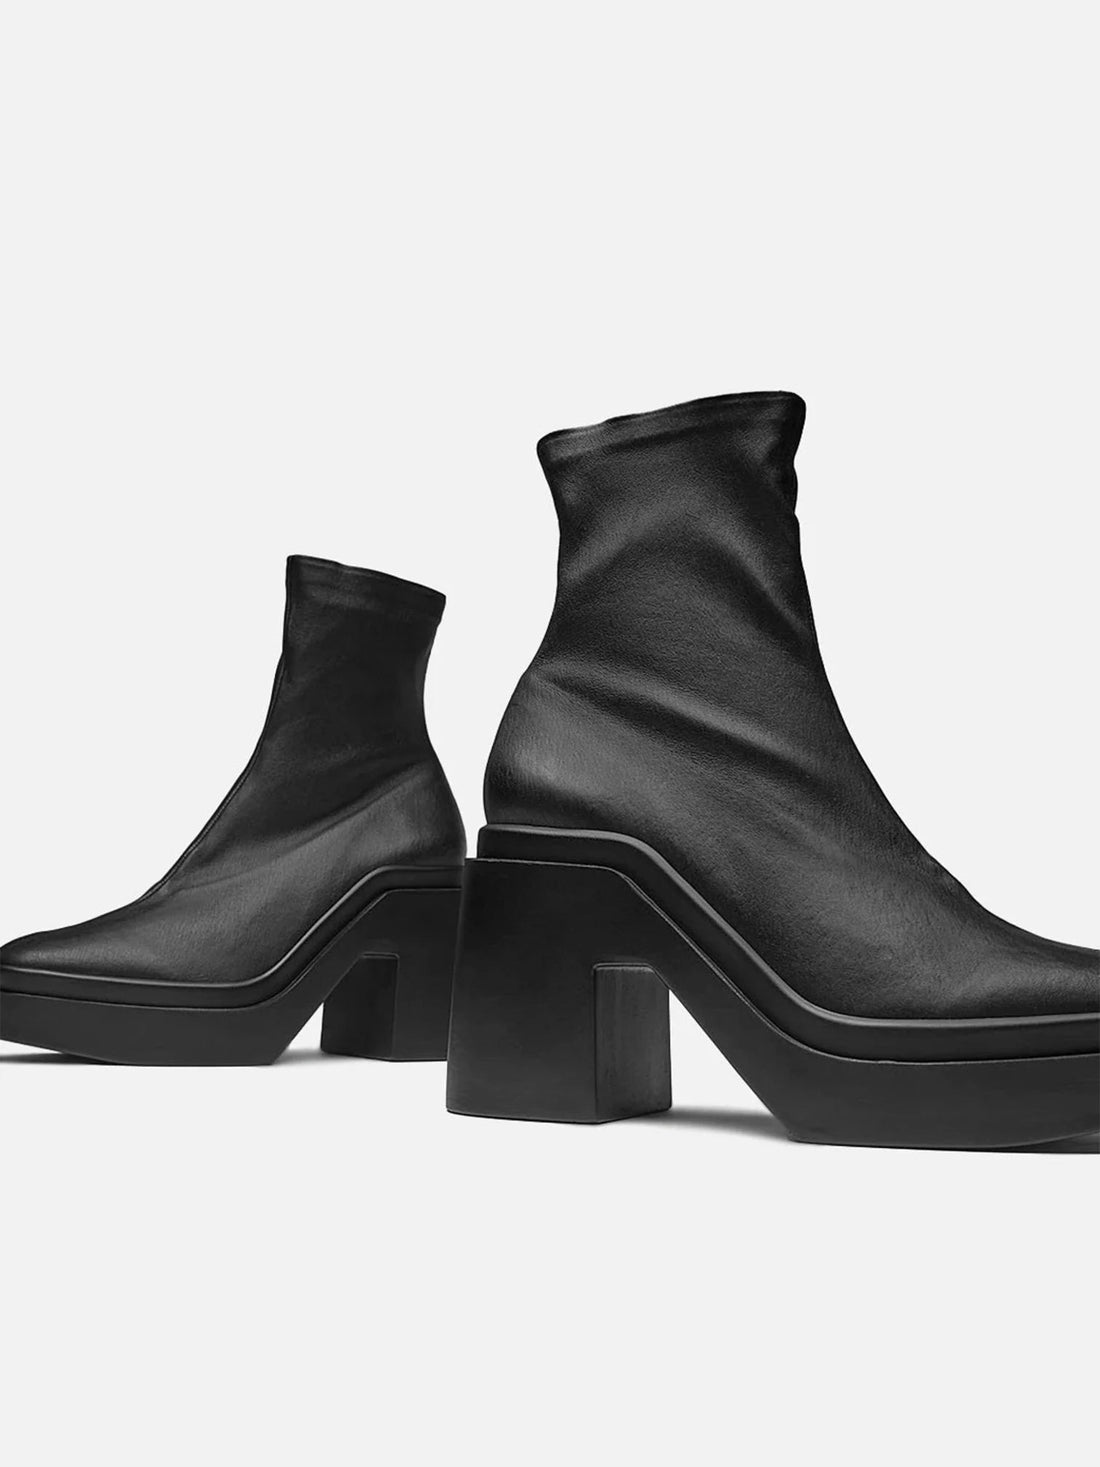 ANKLE BOOTS - NINA ankle boots, leather black - 3606063979603 - Clergerie Paris - Europe